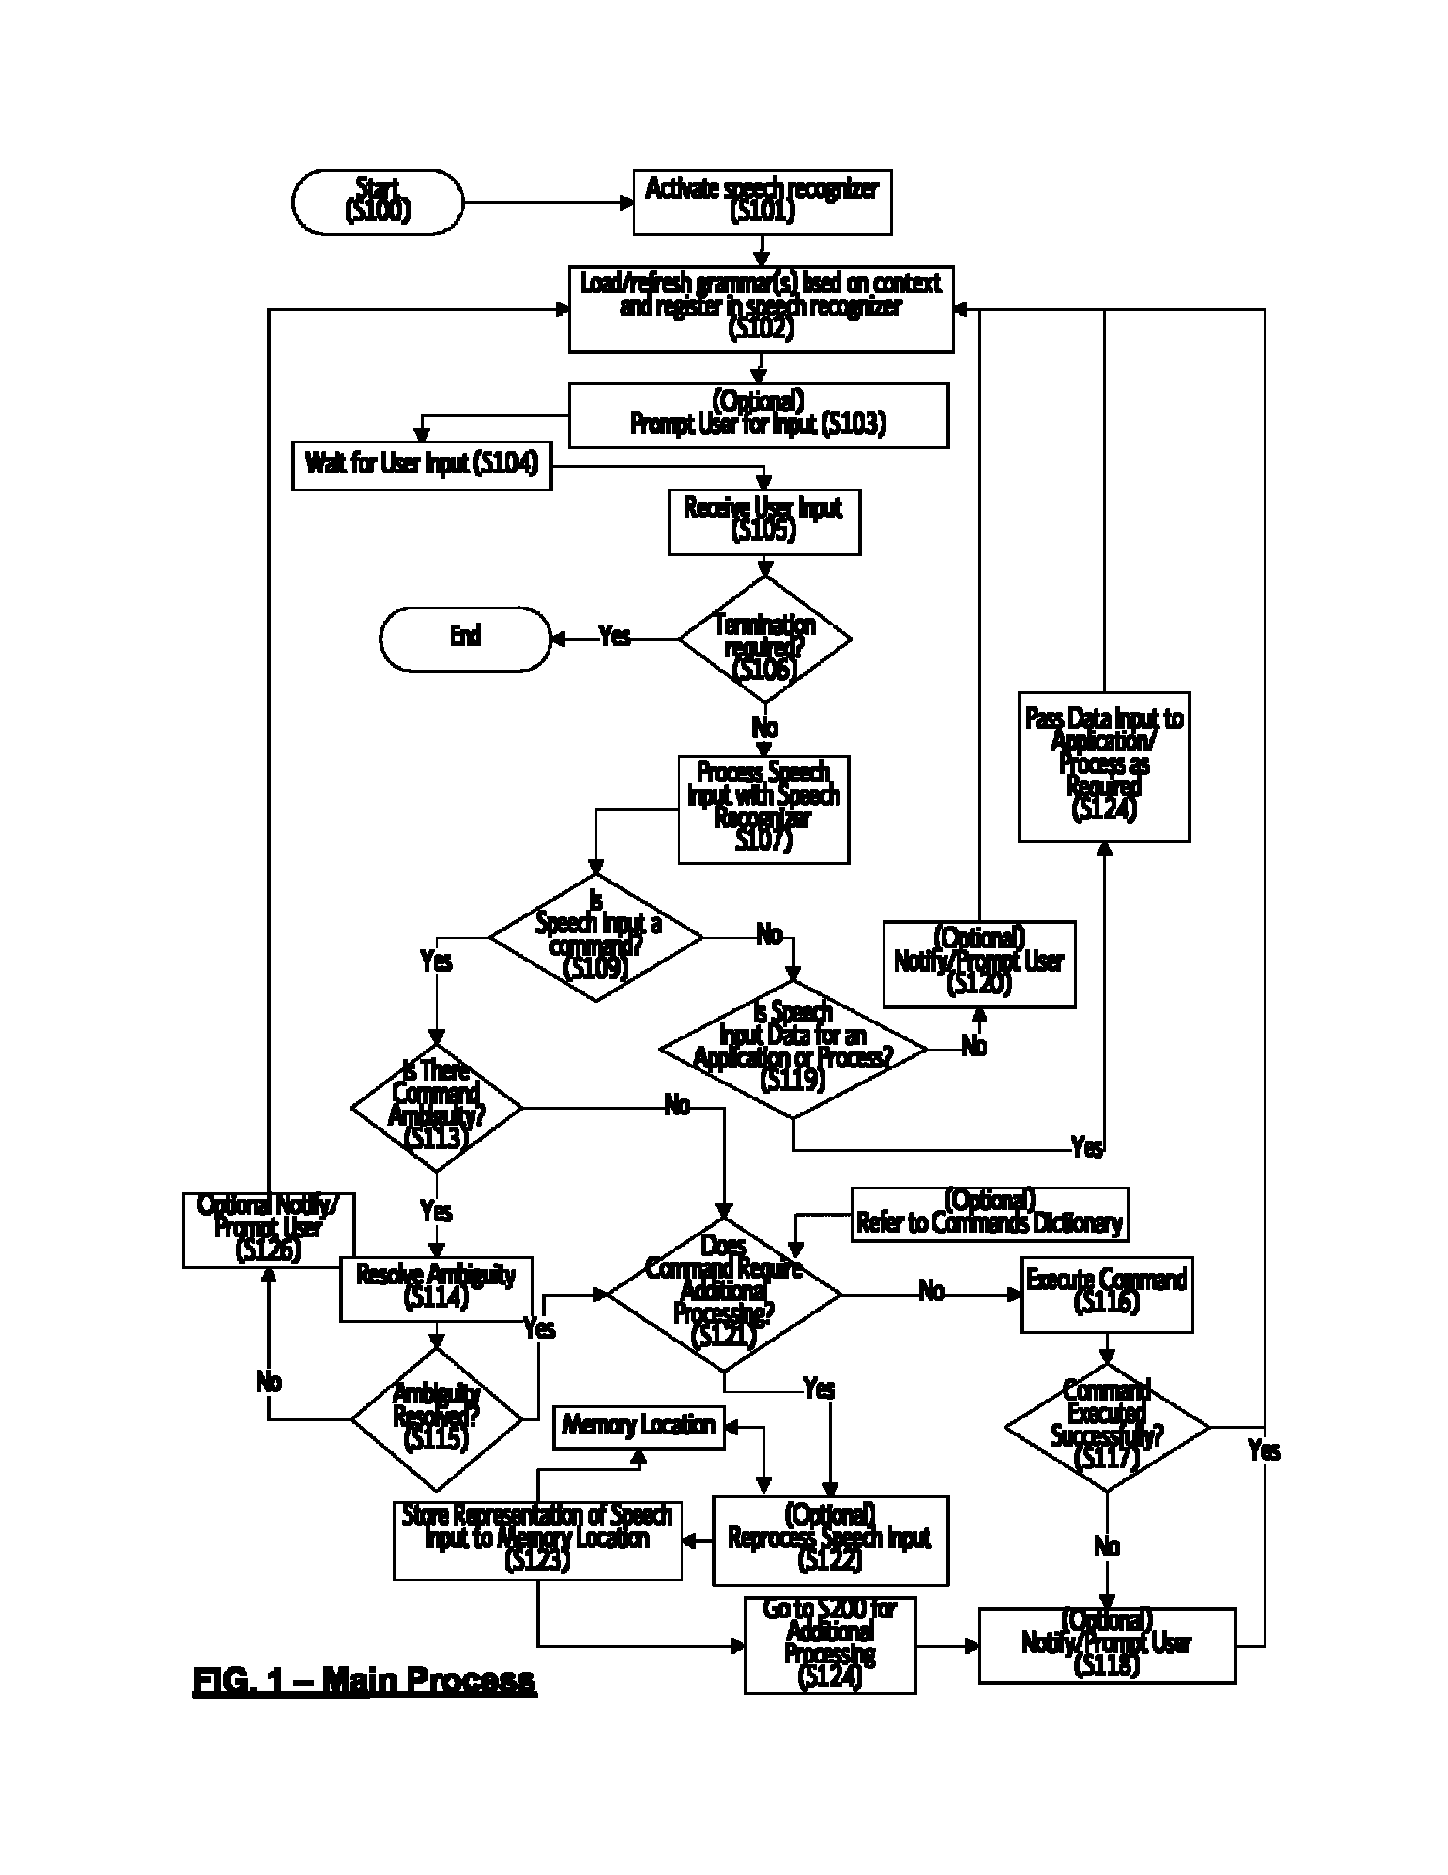 Method for processing the output of a speech recognizer